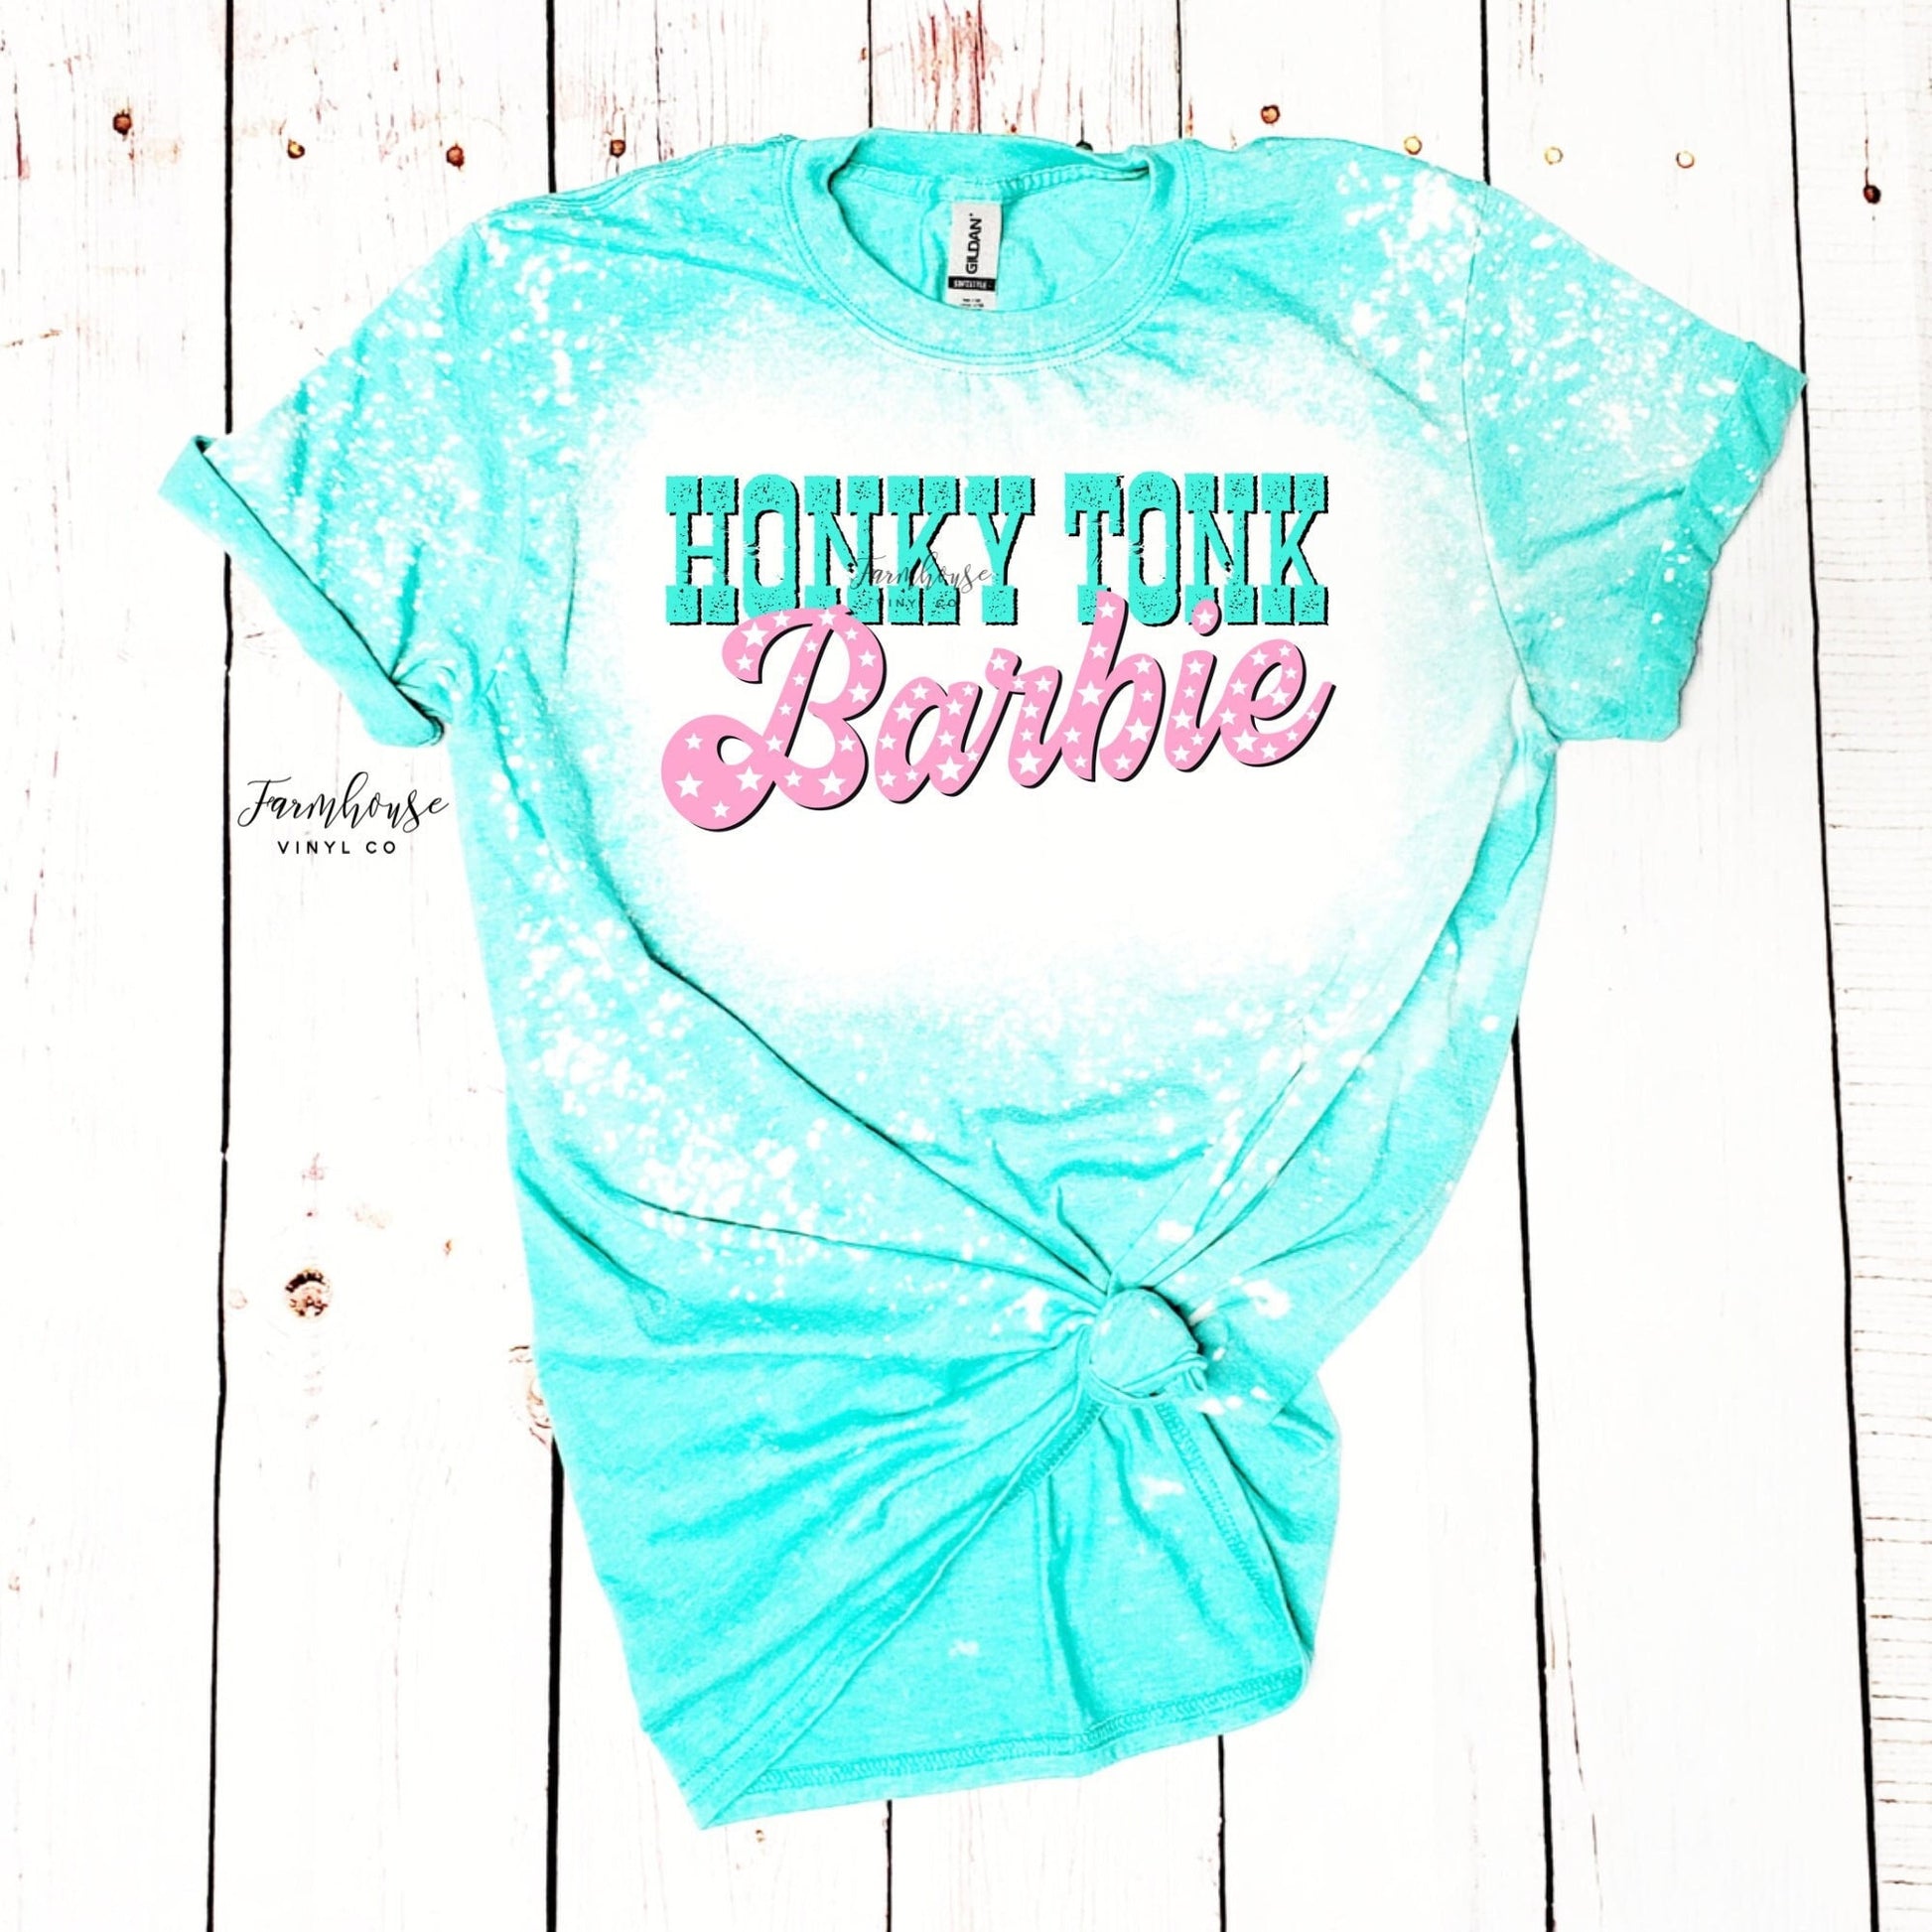 Honky Tonk Barbi Country Bleached Shirt / Trendy tee shirt / Southern Country Shirt / Turquoise Lover / Boutique Wholesale / Mama Me Shirt - Farmhouse Vinyl Co